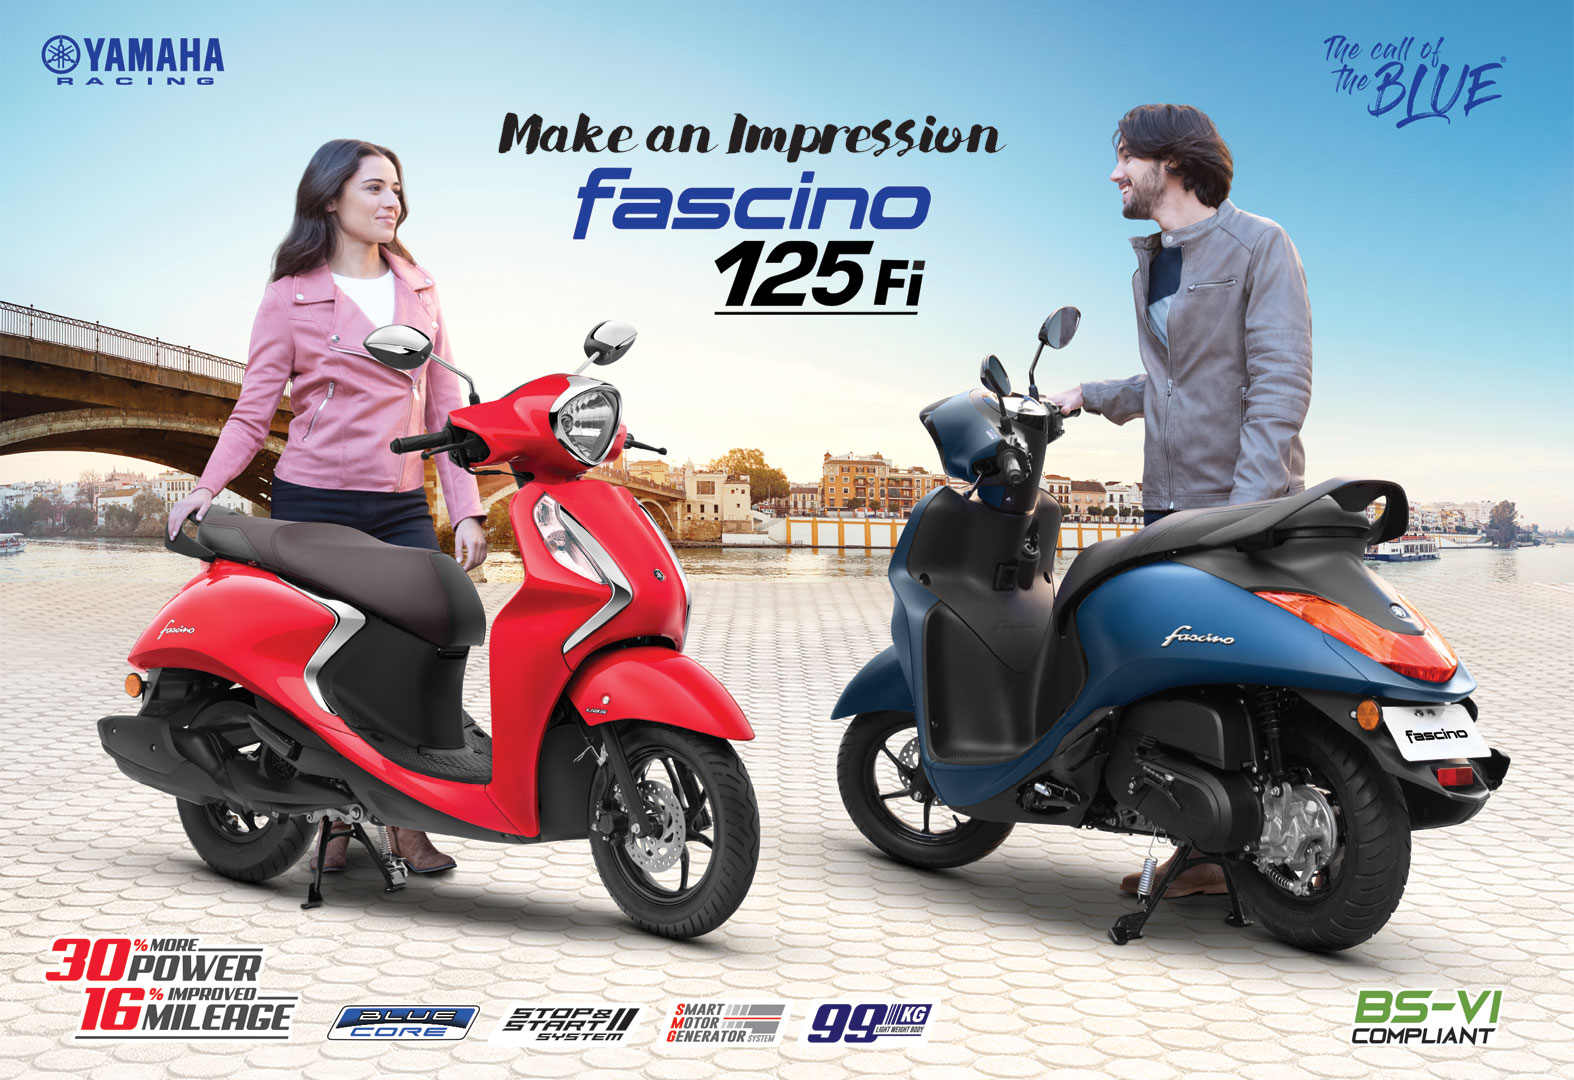 Yamaha Fascino 125 Fi Fascino Bs6 Color Mileage Review Price